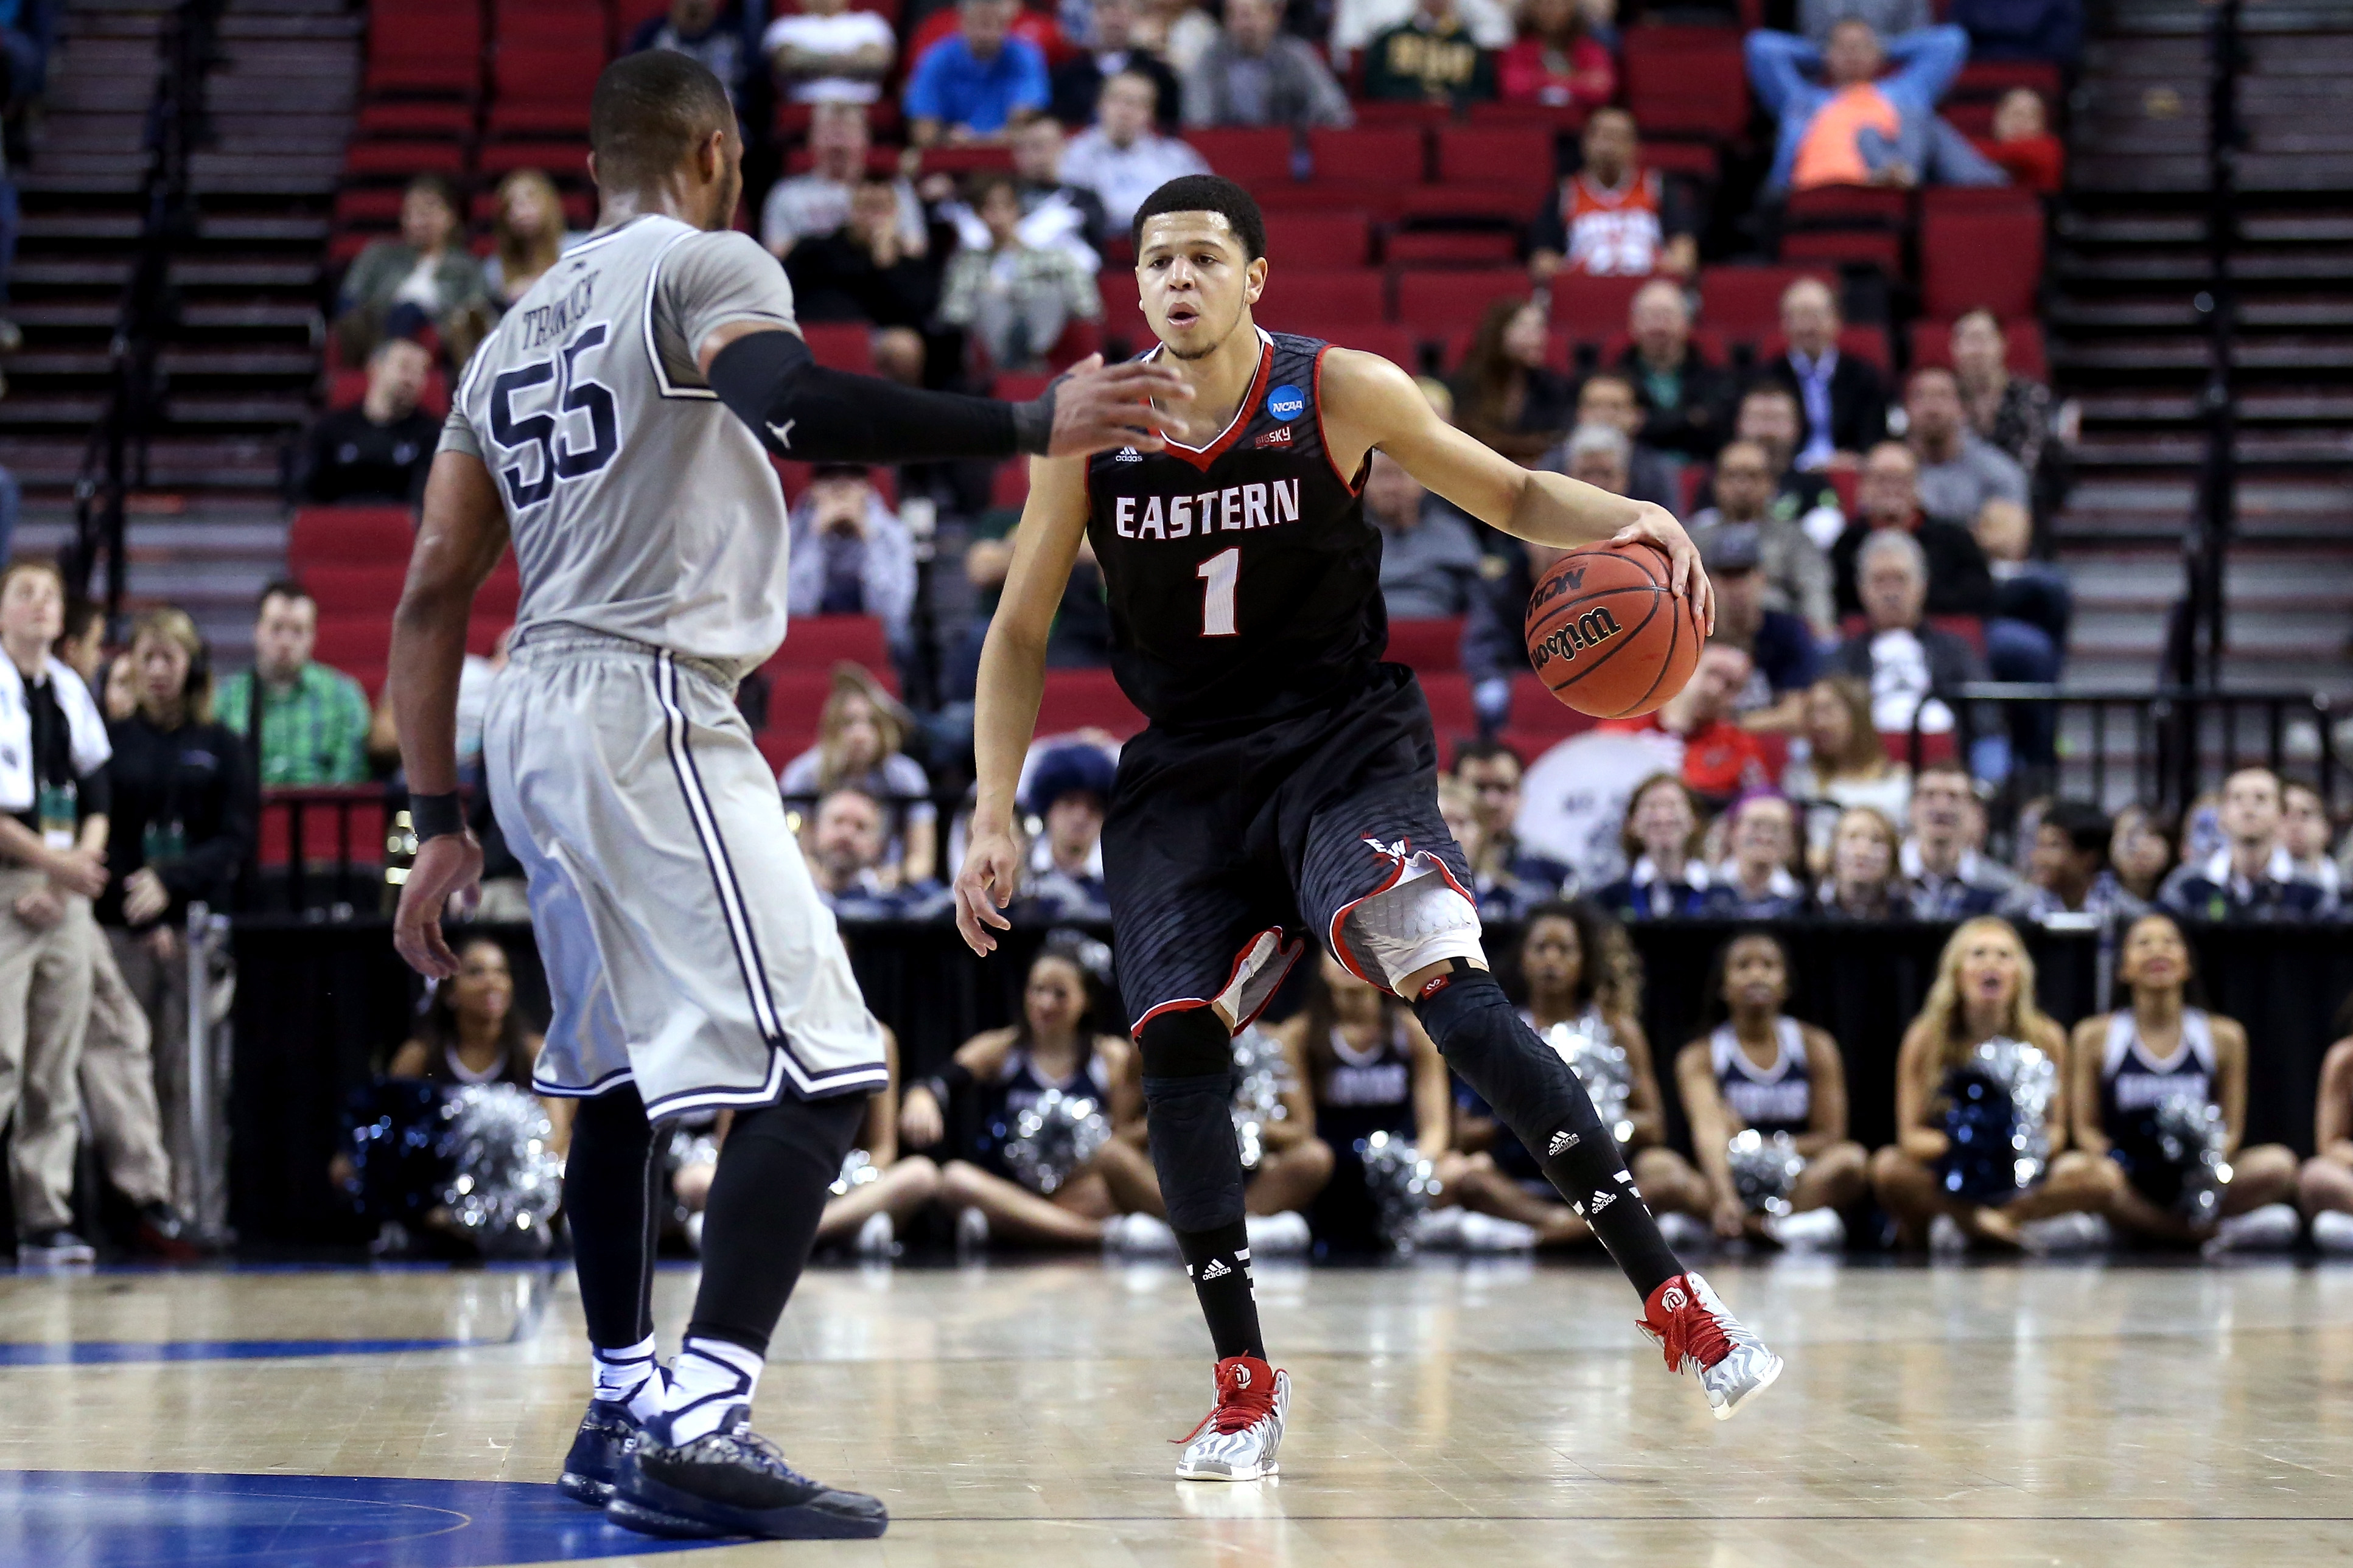 PORTLAND, OR - MARCH 19: Tyler Harvey #1 of the Eastern Washington Eagles handles the ball against Jabril Trawick #55 of the Georgetown Hoyas in the second half during the second round of the 2015 NCAA Men's Basketball Tournament at Moda Center on March 19, 2015 in Portland, Oregon.  (Photo by Stephen Dunn/Getty Images)